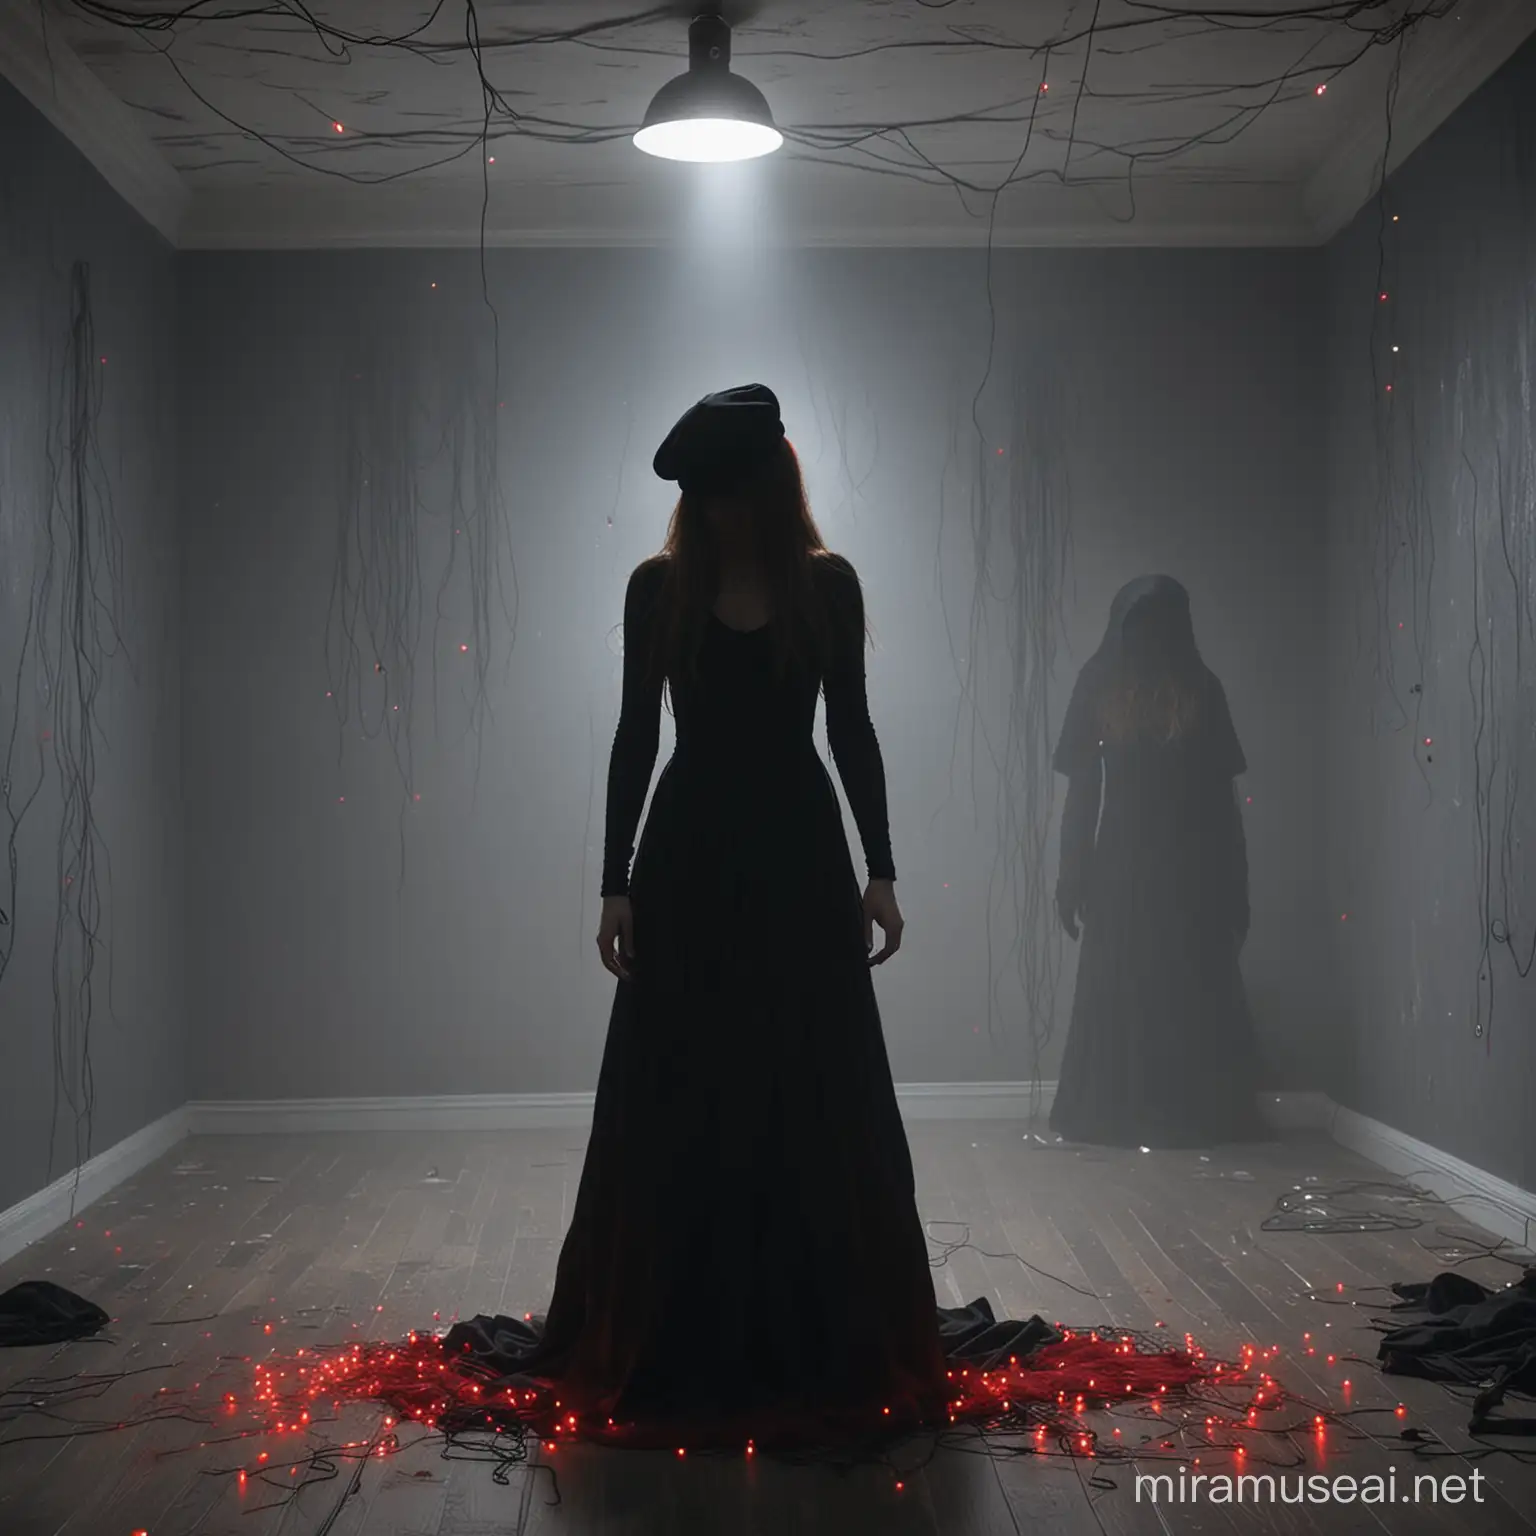 Girl and man, girl crying, a bit far away, tall style, head down, middle of the picture, long black dress, black cap, room a little messy, red thread lights, ghost hands attacking the girl, sad girl  , inside the room, gray room, professional lighting, cinematic, many details, high quality, realistic, music cover